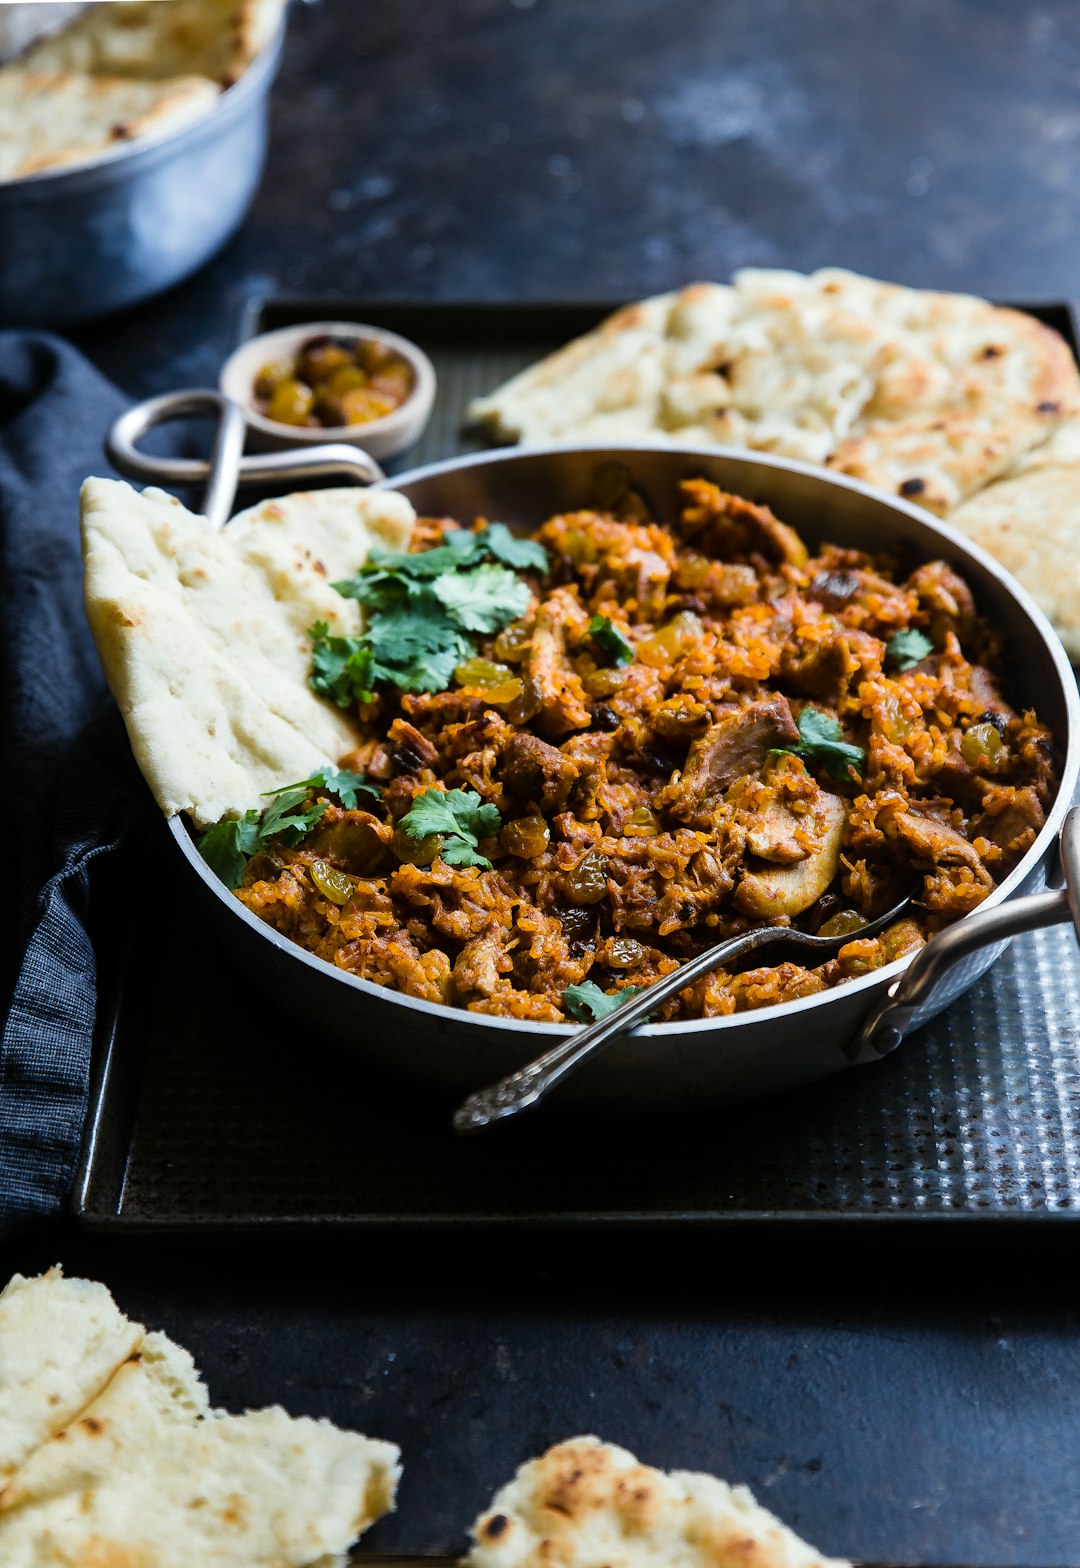 Indian curry dishes